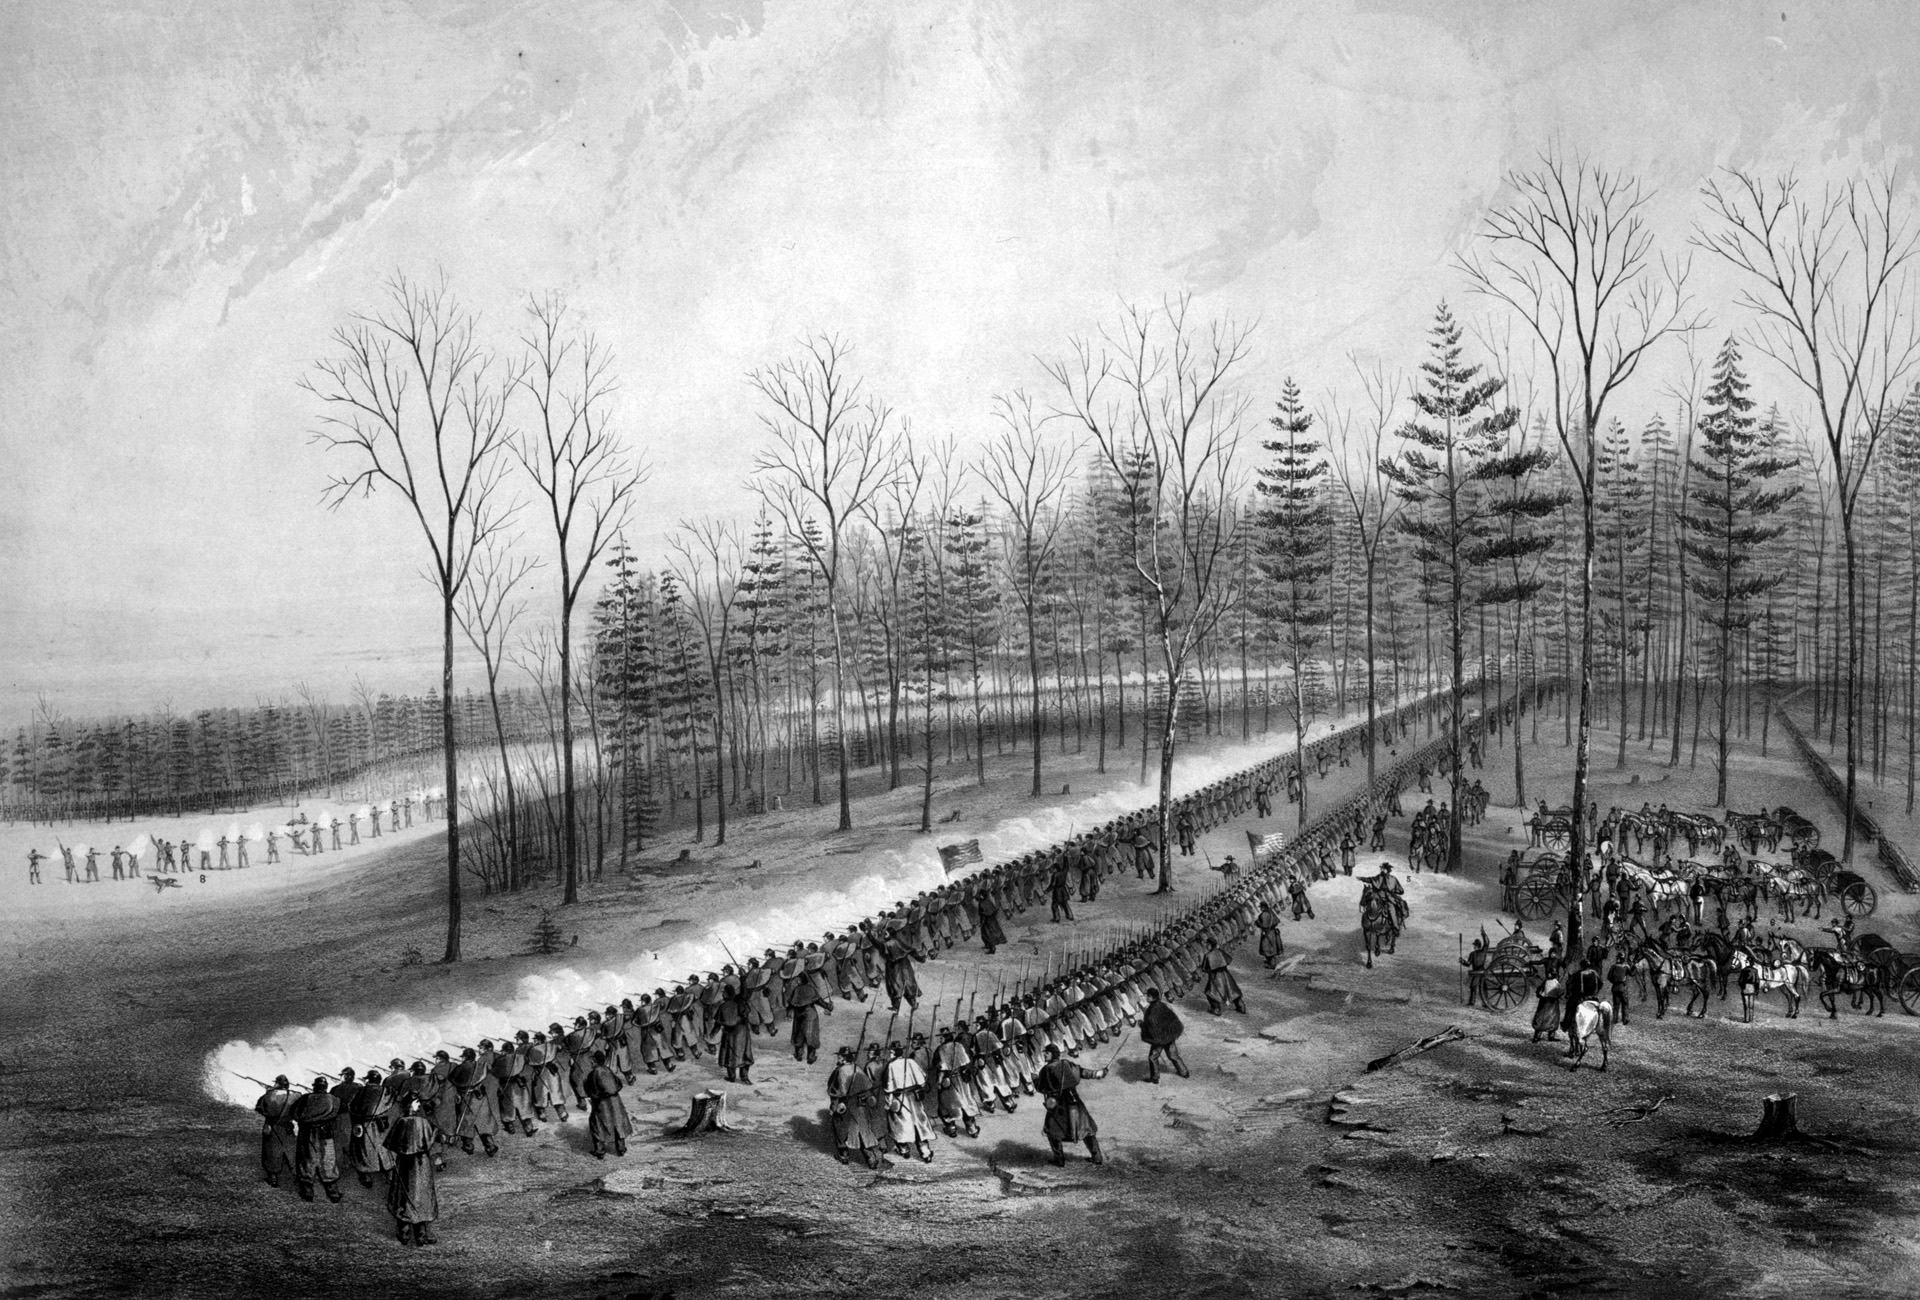 Although Maj. Gen. John Breckinridge's division succeeded in dislodging Union troops from the high ground on the east bank of Stones River on January 2, Union forces made a successful counterattack. 